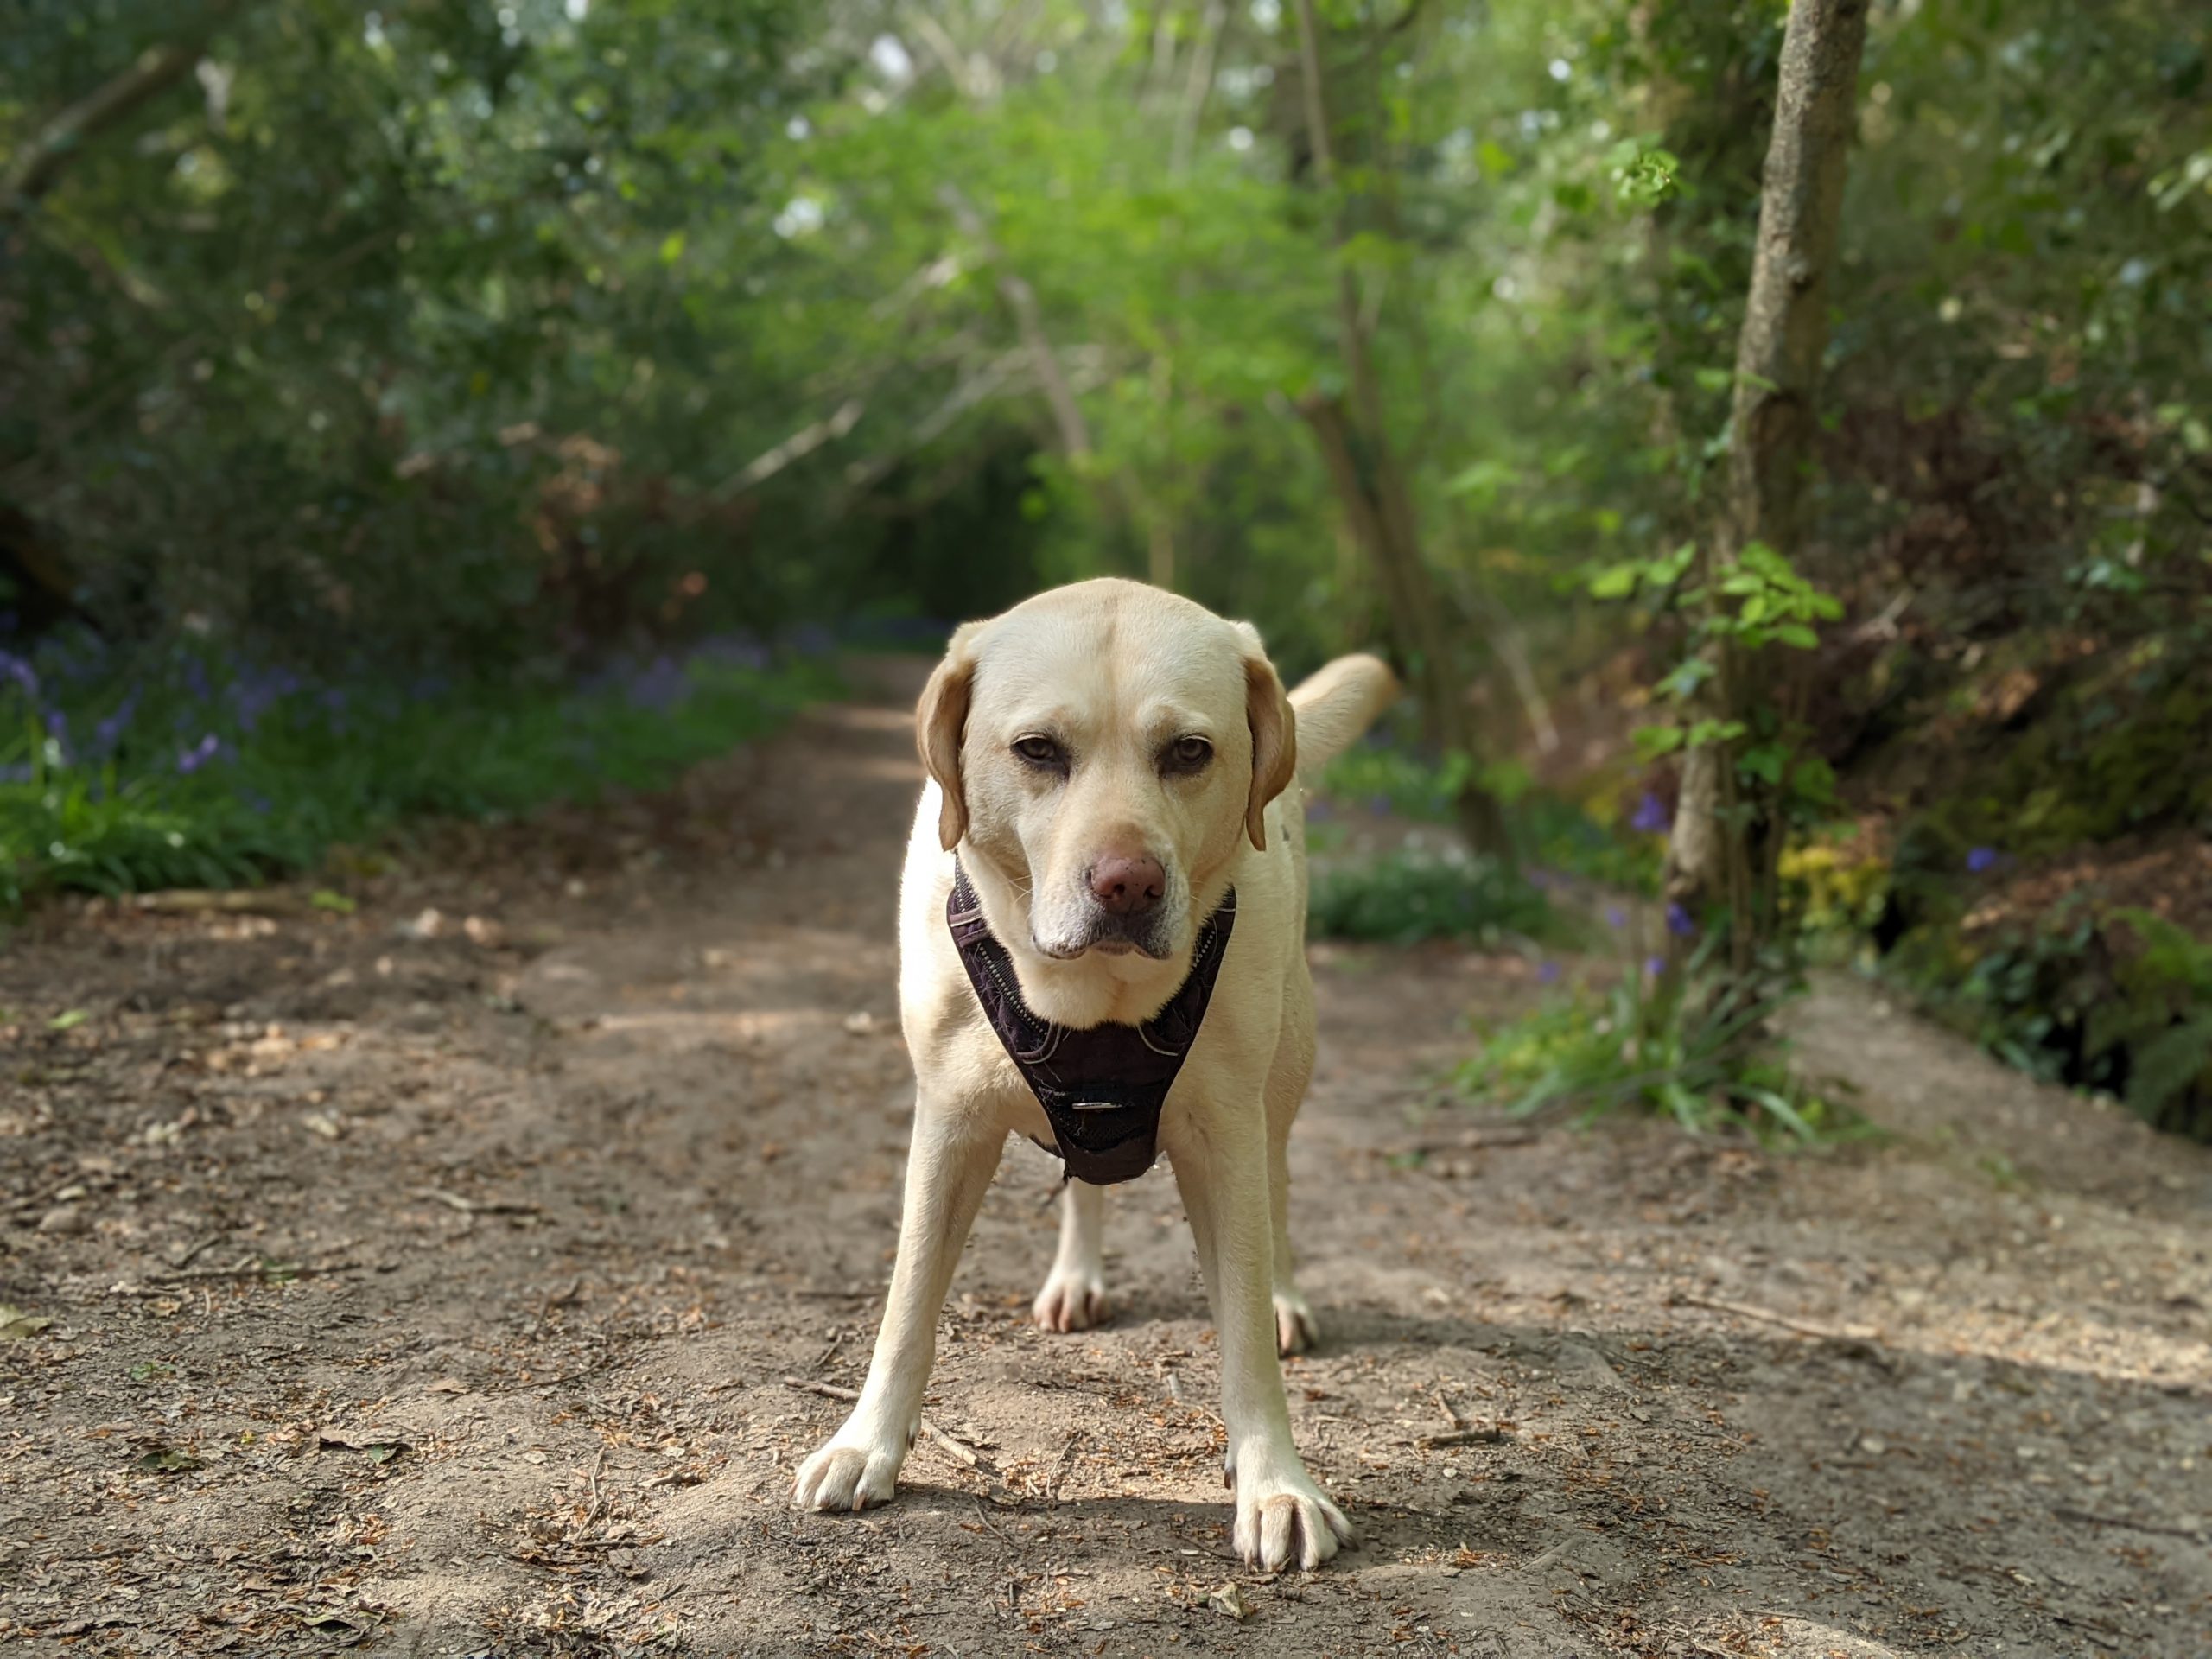 Labrador dog standing on forest path.